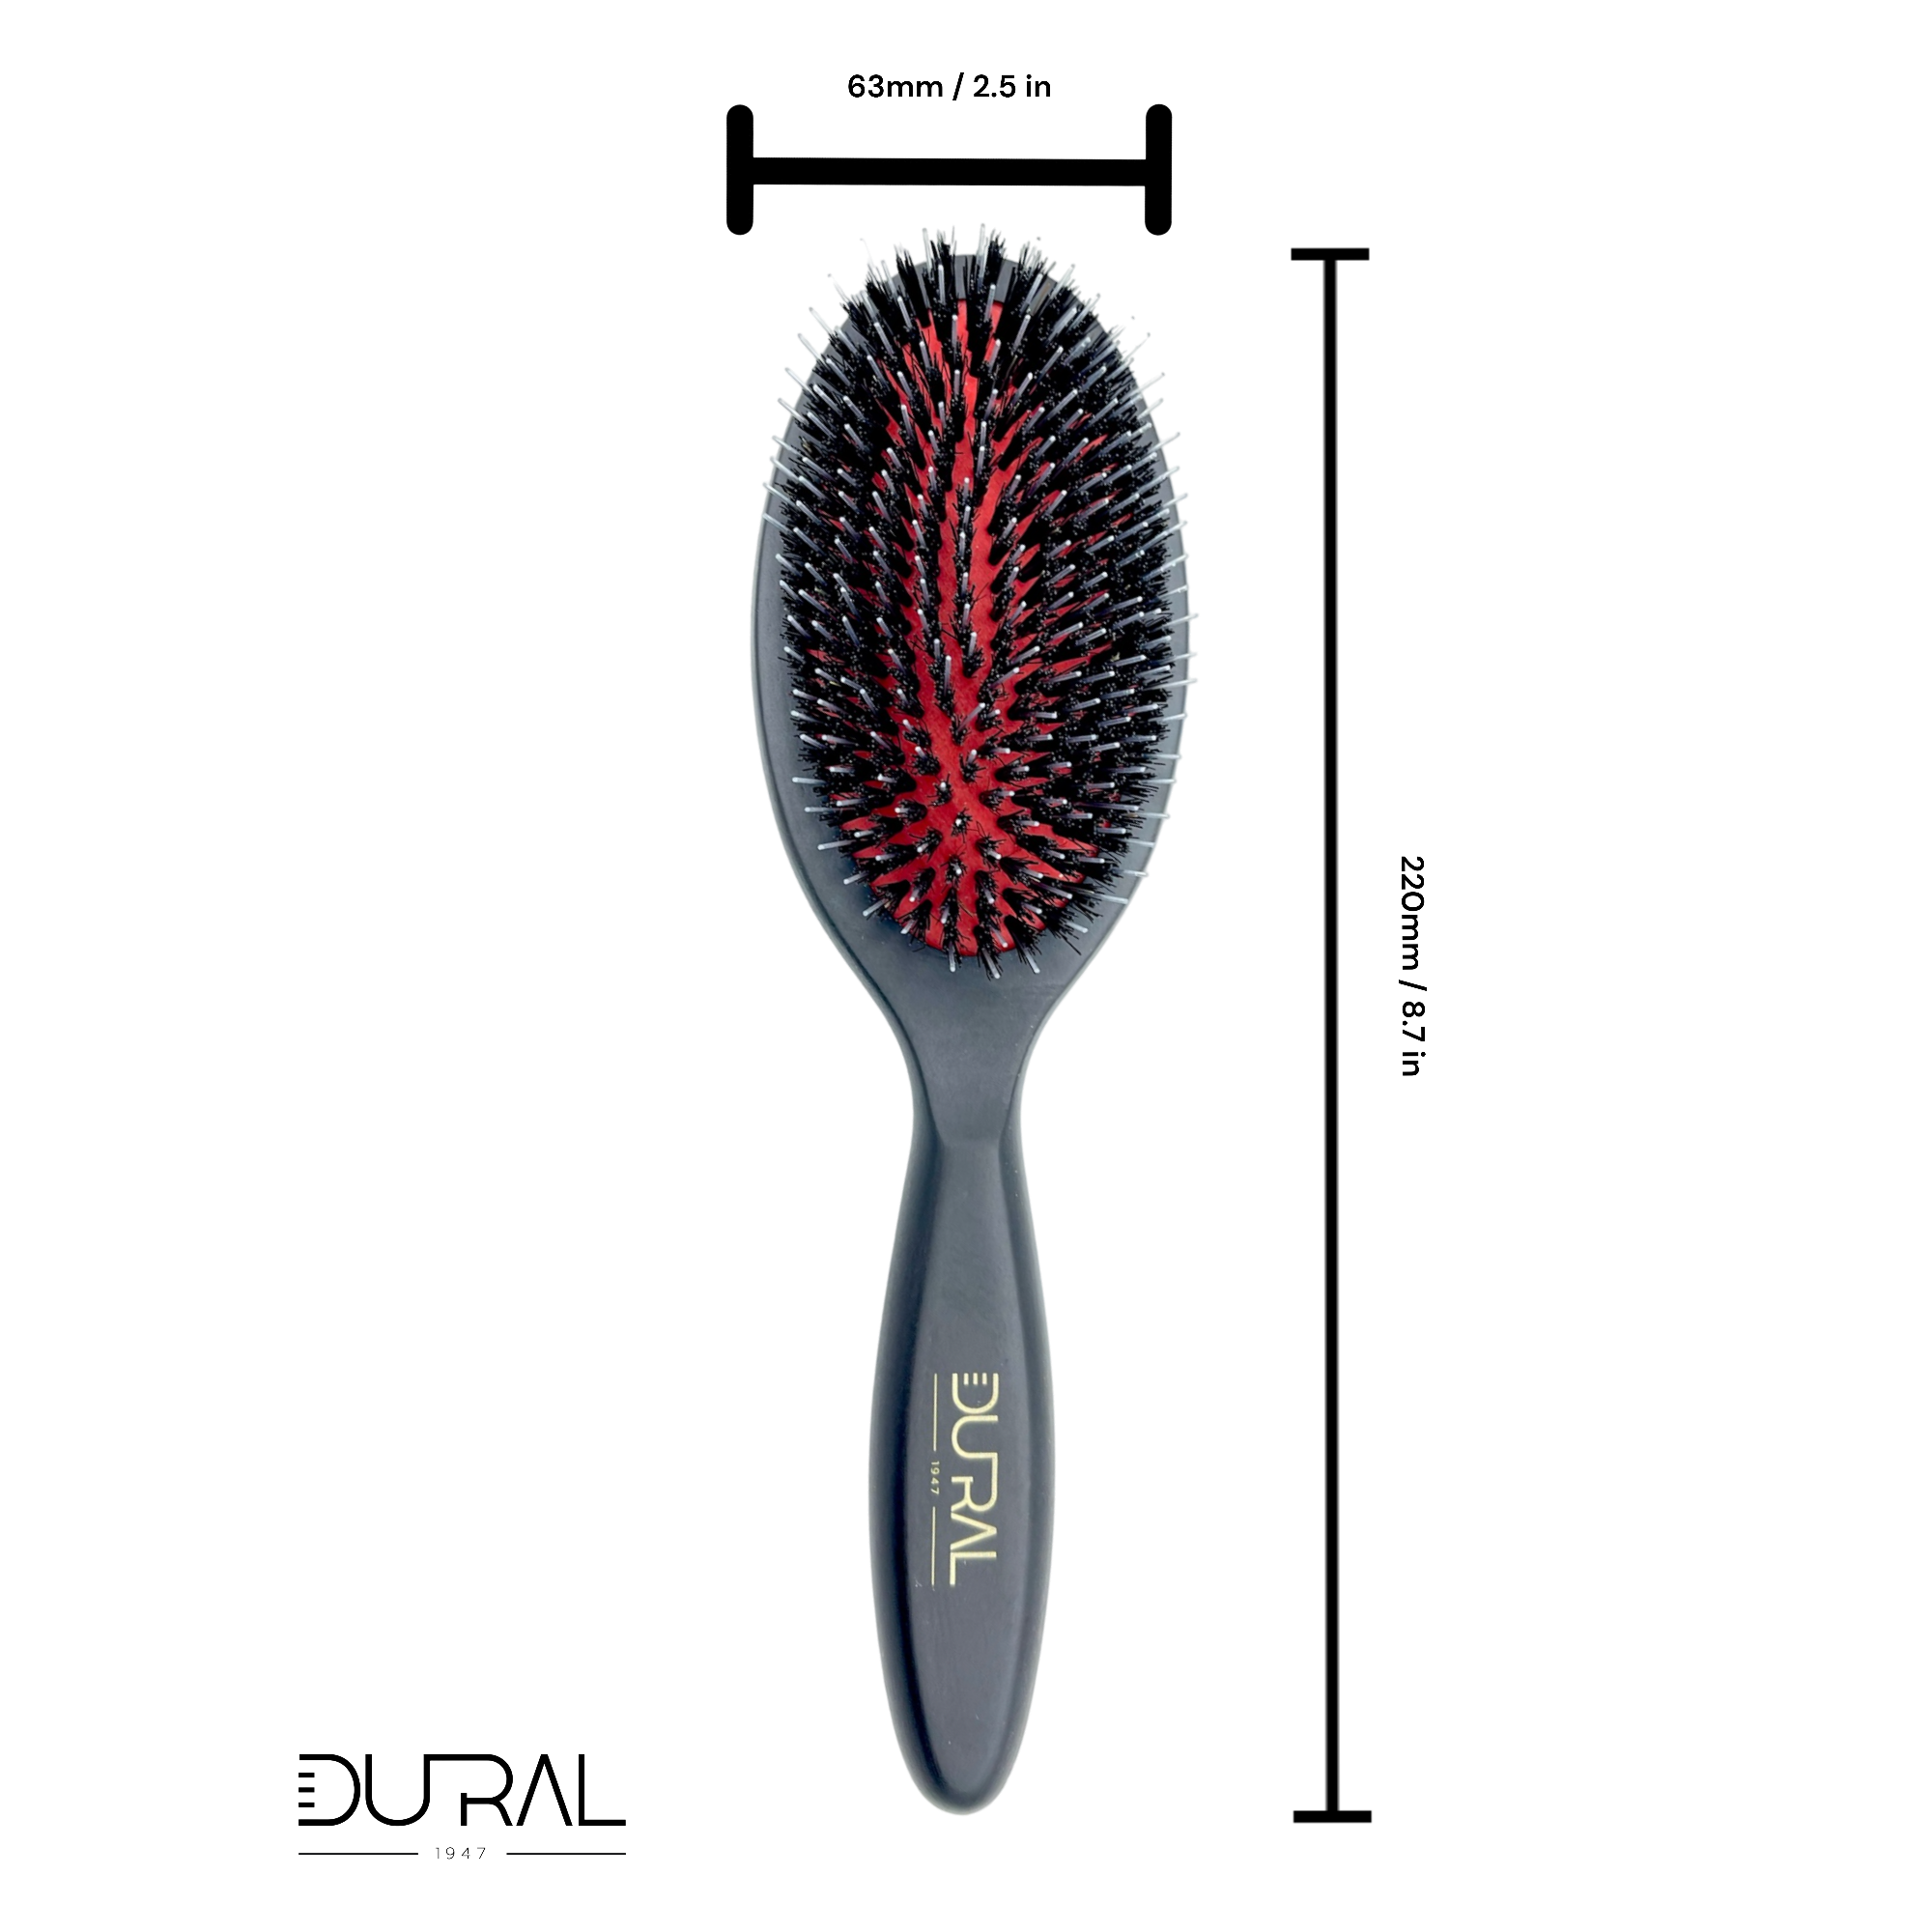 Dural Beech wood rubber cushion hair brush with boar bristles and nylon